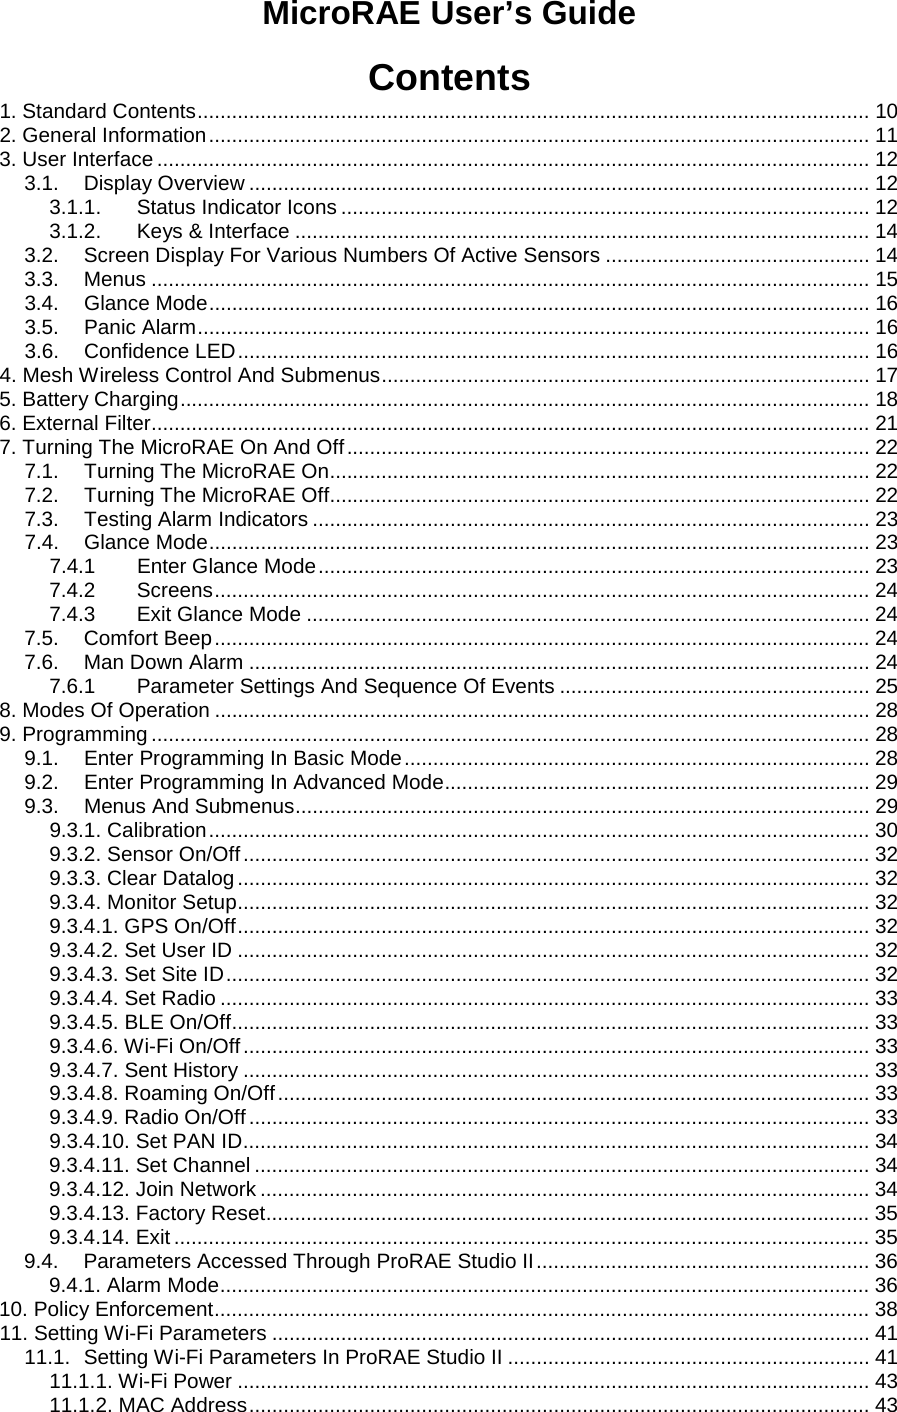 MicroRAE User’s Guide   Contents 1. Standard Contents ..................................................................................................................... 10 2. General Information ................................................................................................................... 11 3. User Interface ............................................................................................................................ 12 3.1. Display Overview ............................................................................................................ 12 3.1.1. Status Indicator Icons ............................................................................................ 12 3.1.2. Keys &amp; Interface .................................................................................................... 14 3.2. Screen Display For Various Numbers Of Active Sensors .............................................. 14 3.3. Menus ............................................................................................................................. 15 3.4. Glance Mode ................................................................................................................... 16 3.5. Panic Alarm ..................................................................................................................... 16 3.6. Confidence LED .............................................................................................................. 16 4. Mesh Wireless Control And Submenus ..................................................................................... 17 5. Battery Charging ........................................................................................................................ 18 6. External Filter............................................................................................................................. 21 7. Turning The MicroRAE On And Off ........................................................................................... 22 7.1. Turning The MicroRAE On.............................................................................................. 22 7.2. Turning The MicroRAE Off.............................................................................................. 22 7.3. Testing Alarm Indicators ................................................................................................. 23 7.4. Glance Mode ................................................................................................................... 23 7.4.1 Enter Glance Mode ................................................................................................ 23 7.4.2 Screens .................................................................................................................. 24 7.4.3 Exit Glance Mode .................................................................................................. 24 7.5. Comfort Beep .................................................................................................................. 24 7.6. Man Down Alarm ............................................................................................................ 24 7.6.1 Parameter Settings And Sequence Of Events ...................................................... 25 8. Modes Of Operation .................................................................................................................. 28 9. Programming ............................................................................................................................. 28 9.1. Enter Programming In Basic Mode ................................................................................. 28 9.2. Enter Programming In Advanced Mode .......................................................................... 29 9.3. Menus And Submenus .................................................................................................... 29 9.3.1. Calibration ................................................................................................................... 30 9.3.2. Sensor On/Off ............................................................................................................. 32 9.3.3. Clear Datalog .............................................................................................................. 32 9.3.4. Monitor Setup .............................................................................................................. 32 9.3.4.1. GPS On/Off .............................................................................................................. 32 9.3.4.2. Set User ID .............................................................................................................. 32 9.3.4.3. Set Site ID ................................................................................................................ 32 9.3.4.4. Set Radio ................................................................................................................. 33 9.3.4.5. BLE On/Off ............................................................................................................... 33 9.3.4.6. Wi-Fi On/Off ............................................................................................................. 33 9.3.4.7. Sent History ............................................................................................................. 33 9.3.4.8. Roaming On/Off ....................................................................................................... 33 9.3.4.9. Radio On/Off ............................................................................................................ 33 9.3.4.10. Set PAN ID ............................................................................................................. 34 9.3.4.11. Set Channel ........................................................................................................... 34 9.3.4.12. Join Network .......................................................................................................... 34 9.3.4.13. Factory Reset ......................................................................................................... 35 9.3.4.14. Exit ......................................................................................................................... 35 9.4. Parameters Accessed Through ProRAE Studio II .......................................................... 36 9.4.1. Alarm Mode ................................................................................................................. 36 10. Policy Enforcement .................................................................................................................. 38 11. Setting Wi-Fi Parameters ........................................................................................................ 41 11.1. Setting Wi-Fi Parameters In ProRAE Studio II ............................................................... 41 11.1.1. Wi-Fi Power .............................................................................................................. 43 11.1.2. MAC Address ............................................................................................................ 43 